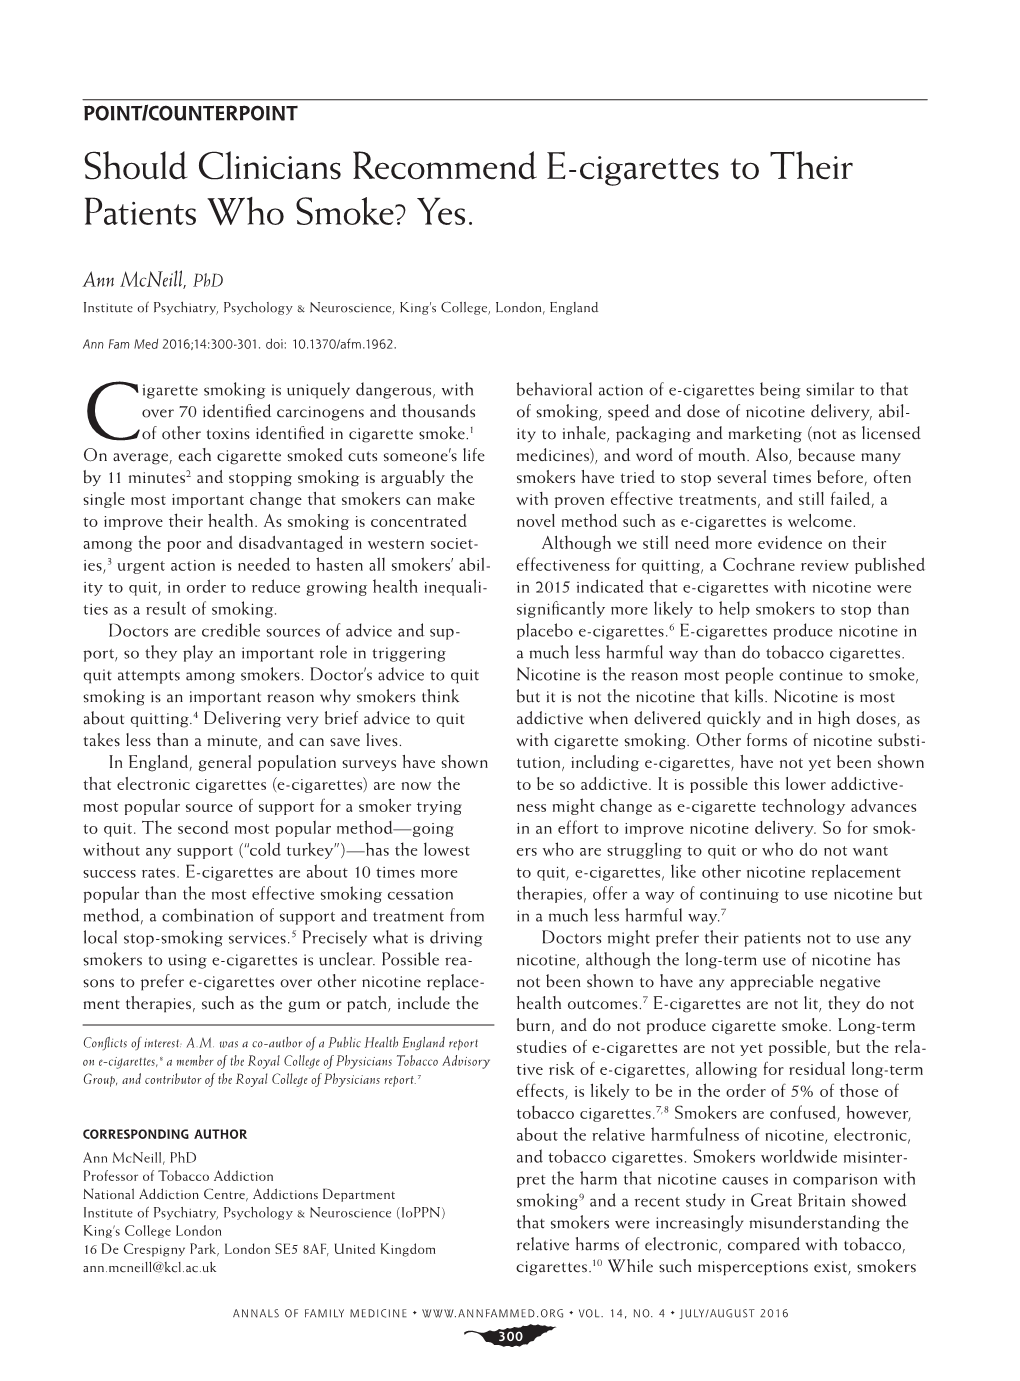 Should Clinicians Recommend E-Cigarettes to Their Patients Who Smoke? Yes